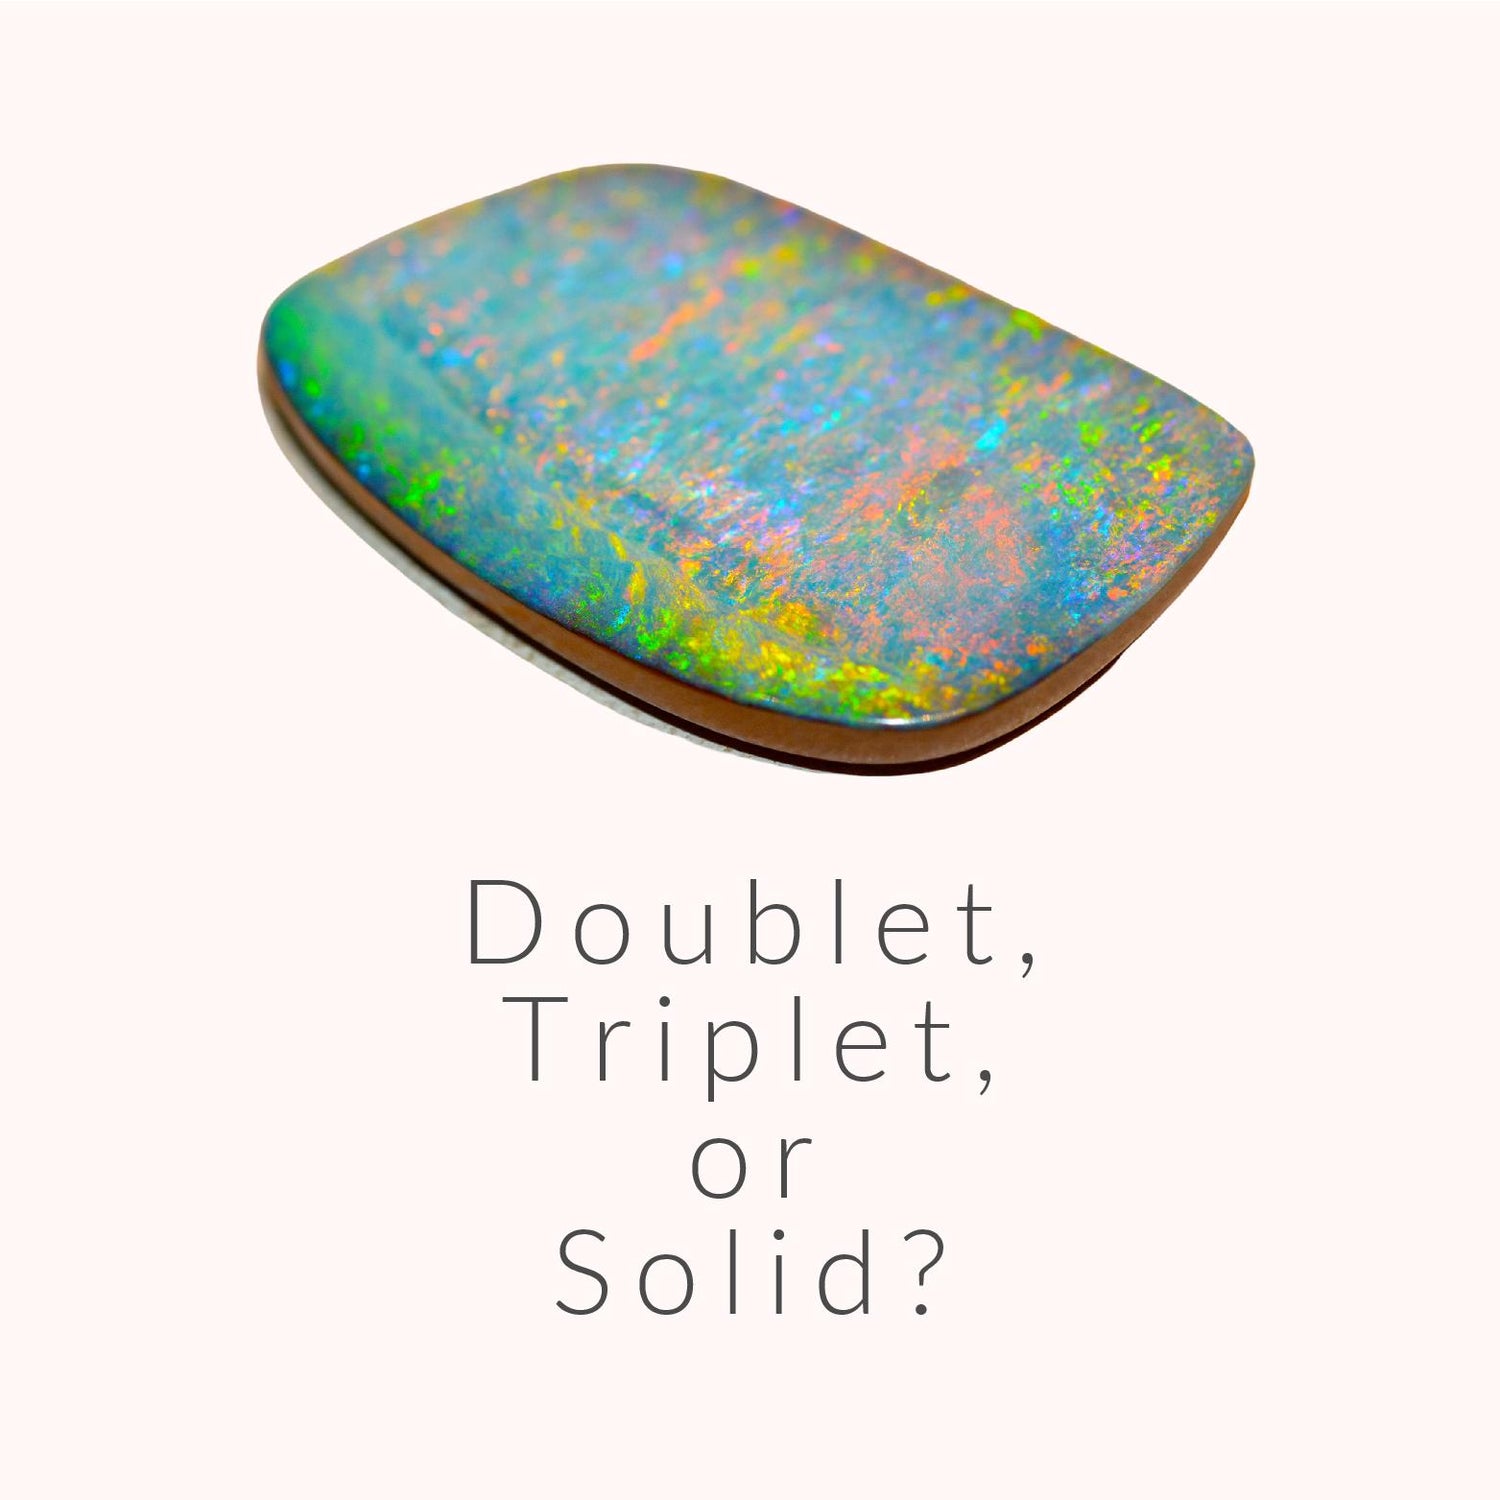 Opal Doublet photo as a teaser to a blog on doublets, triplets and solid opals.